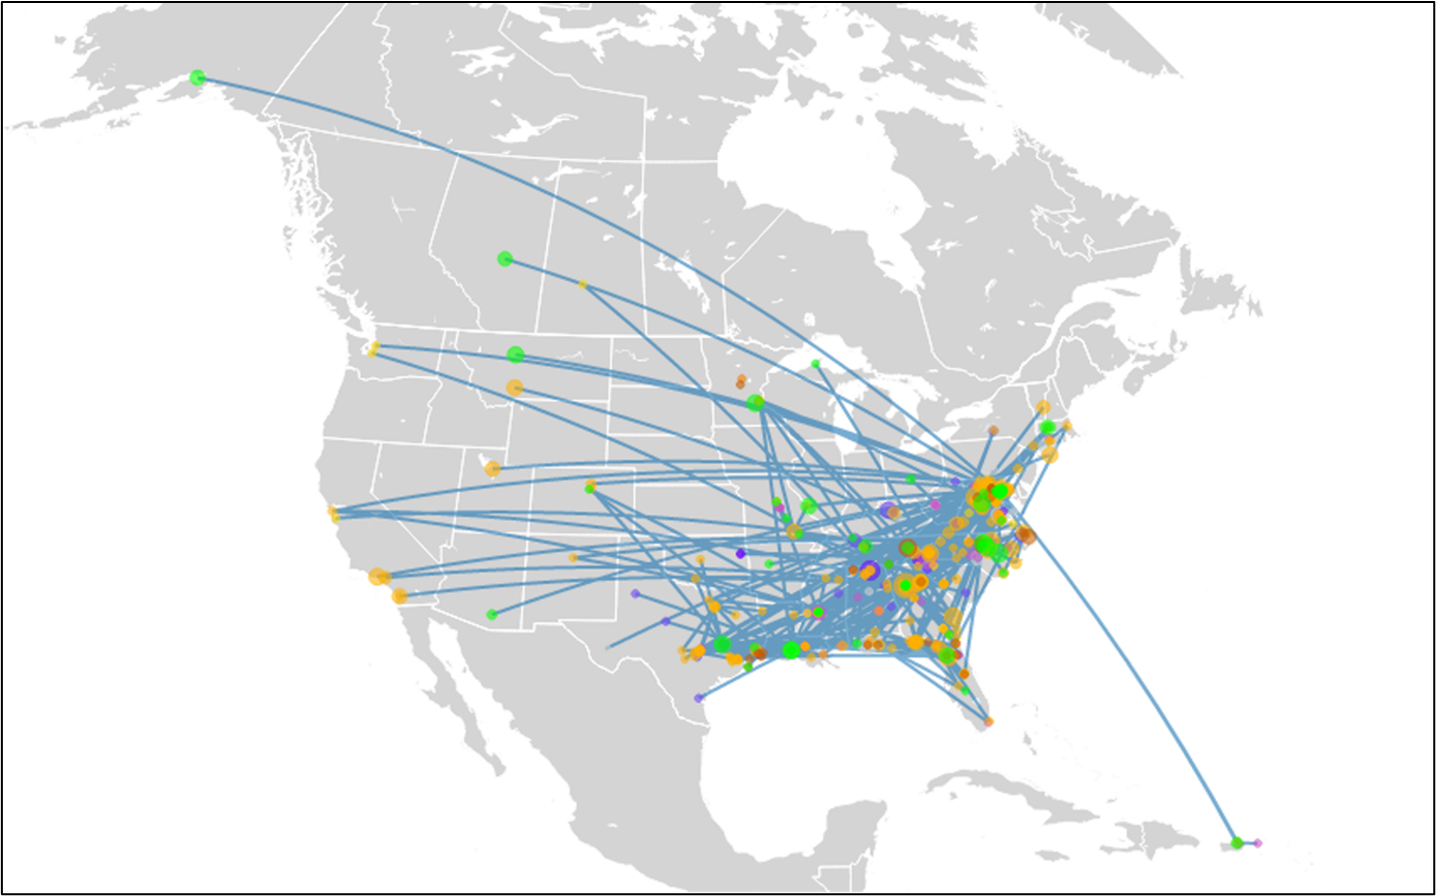 Gray map of the United States with dots and crisscrossed with lines showing individuals and relationships.